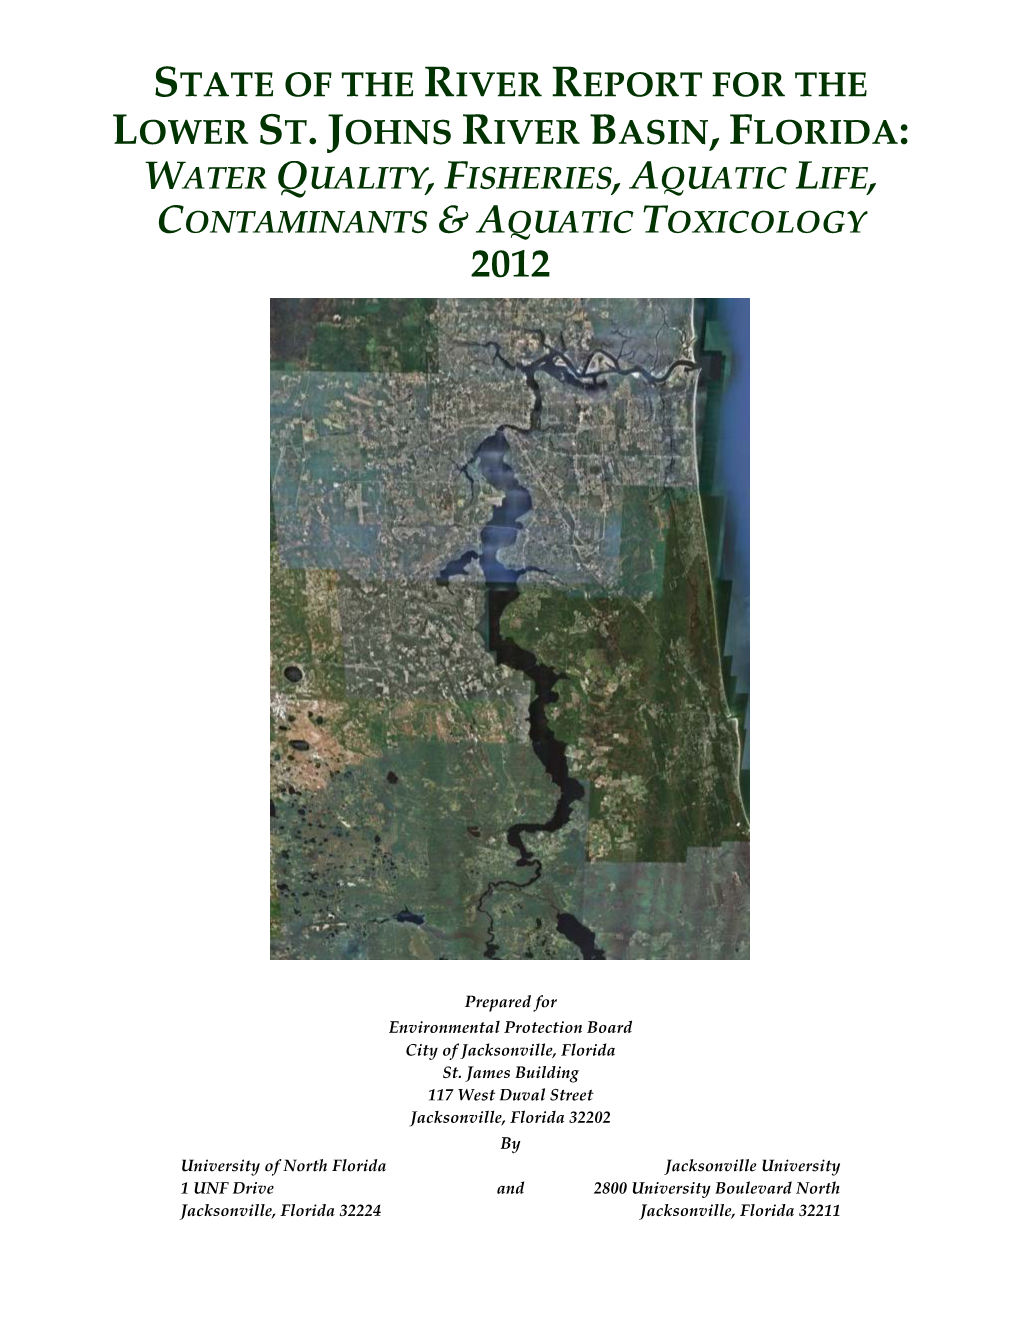 State of the River Report for the Lower St. Johns River Basin, Florida: Water Quality, Fisheries, Aquatic Life, Contaminants & Aquatic Toxicology 2012